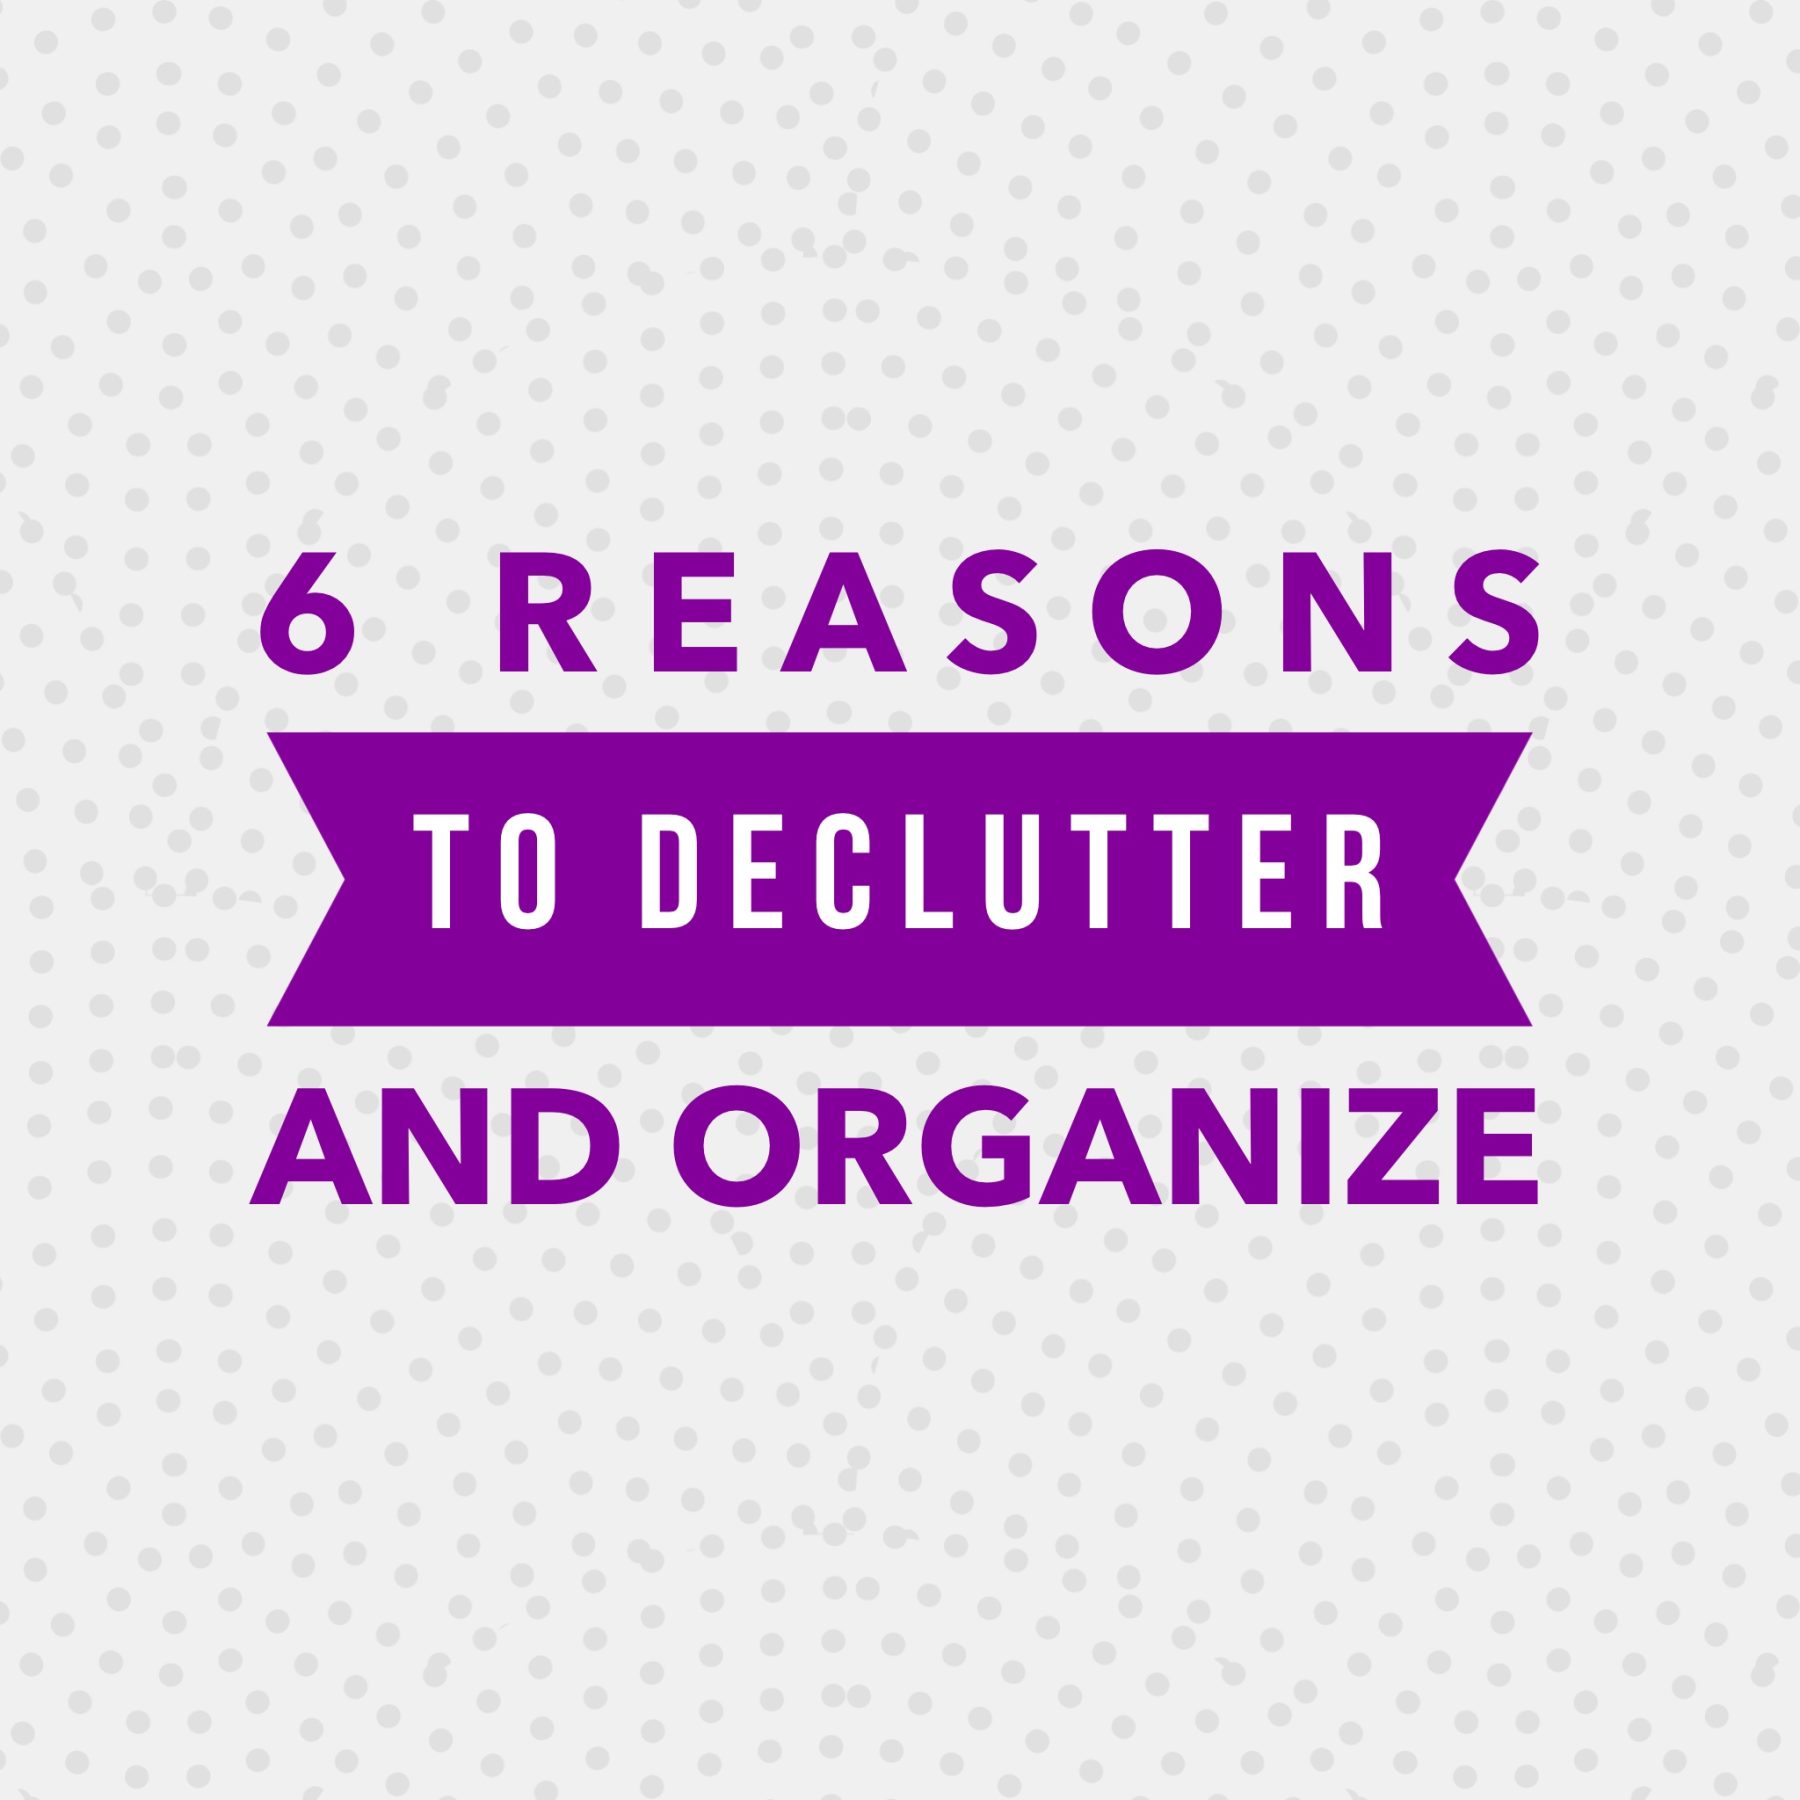 6 reasons to declutter and organize